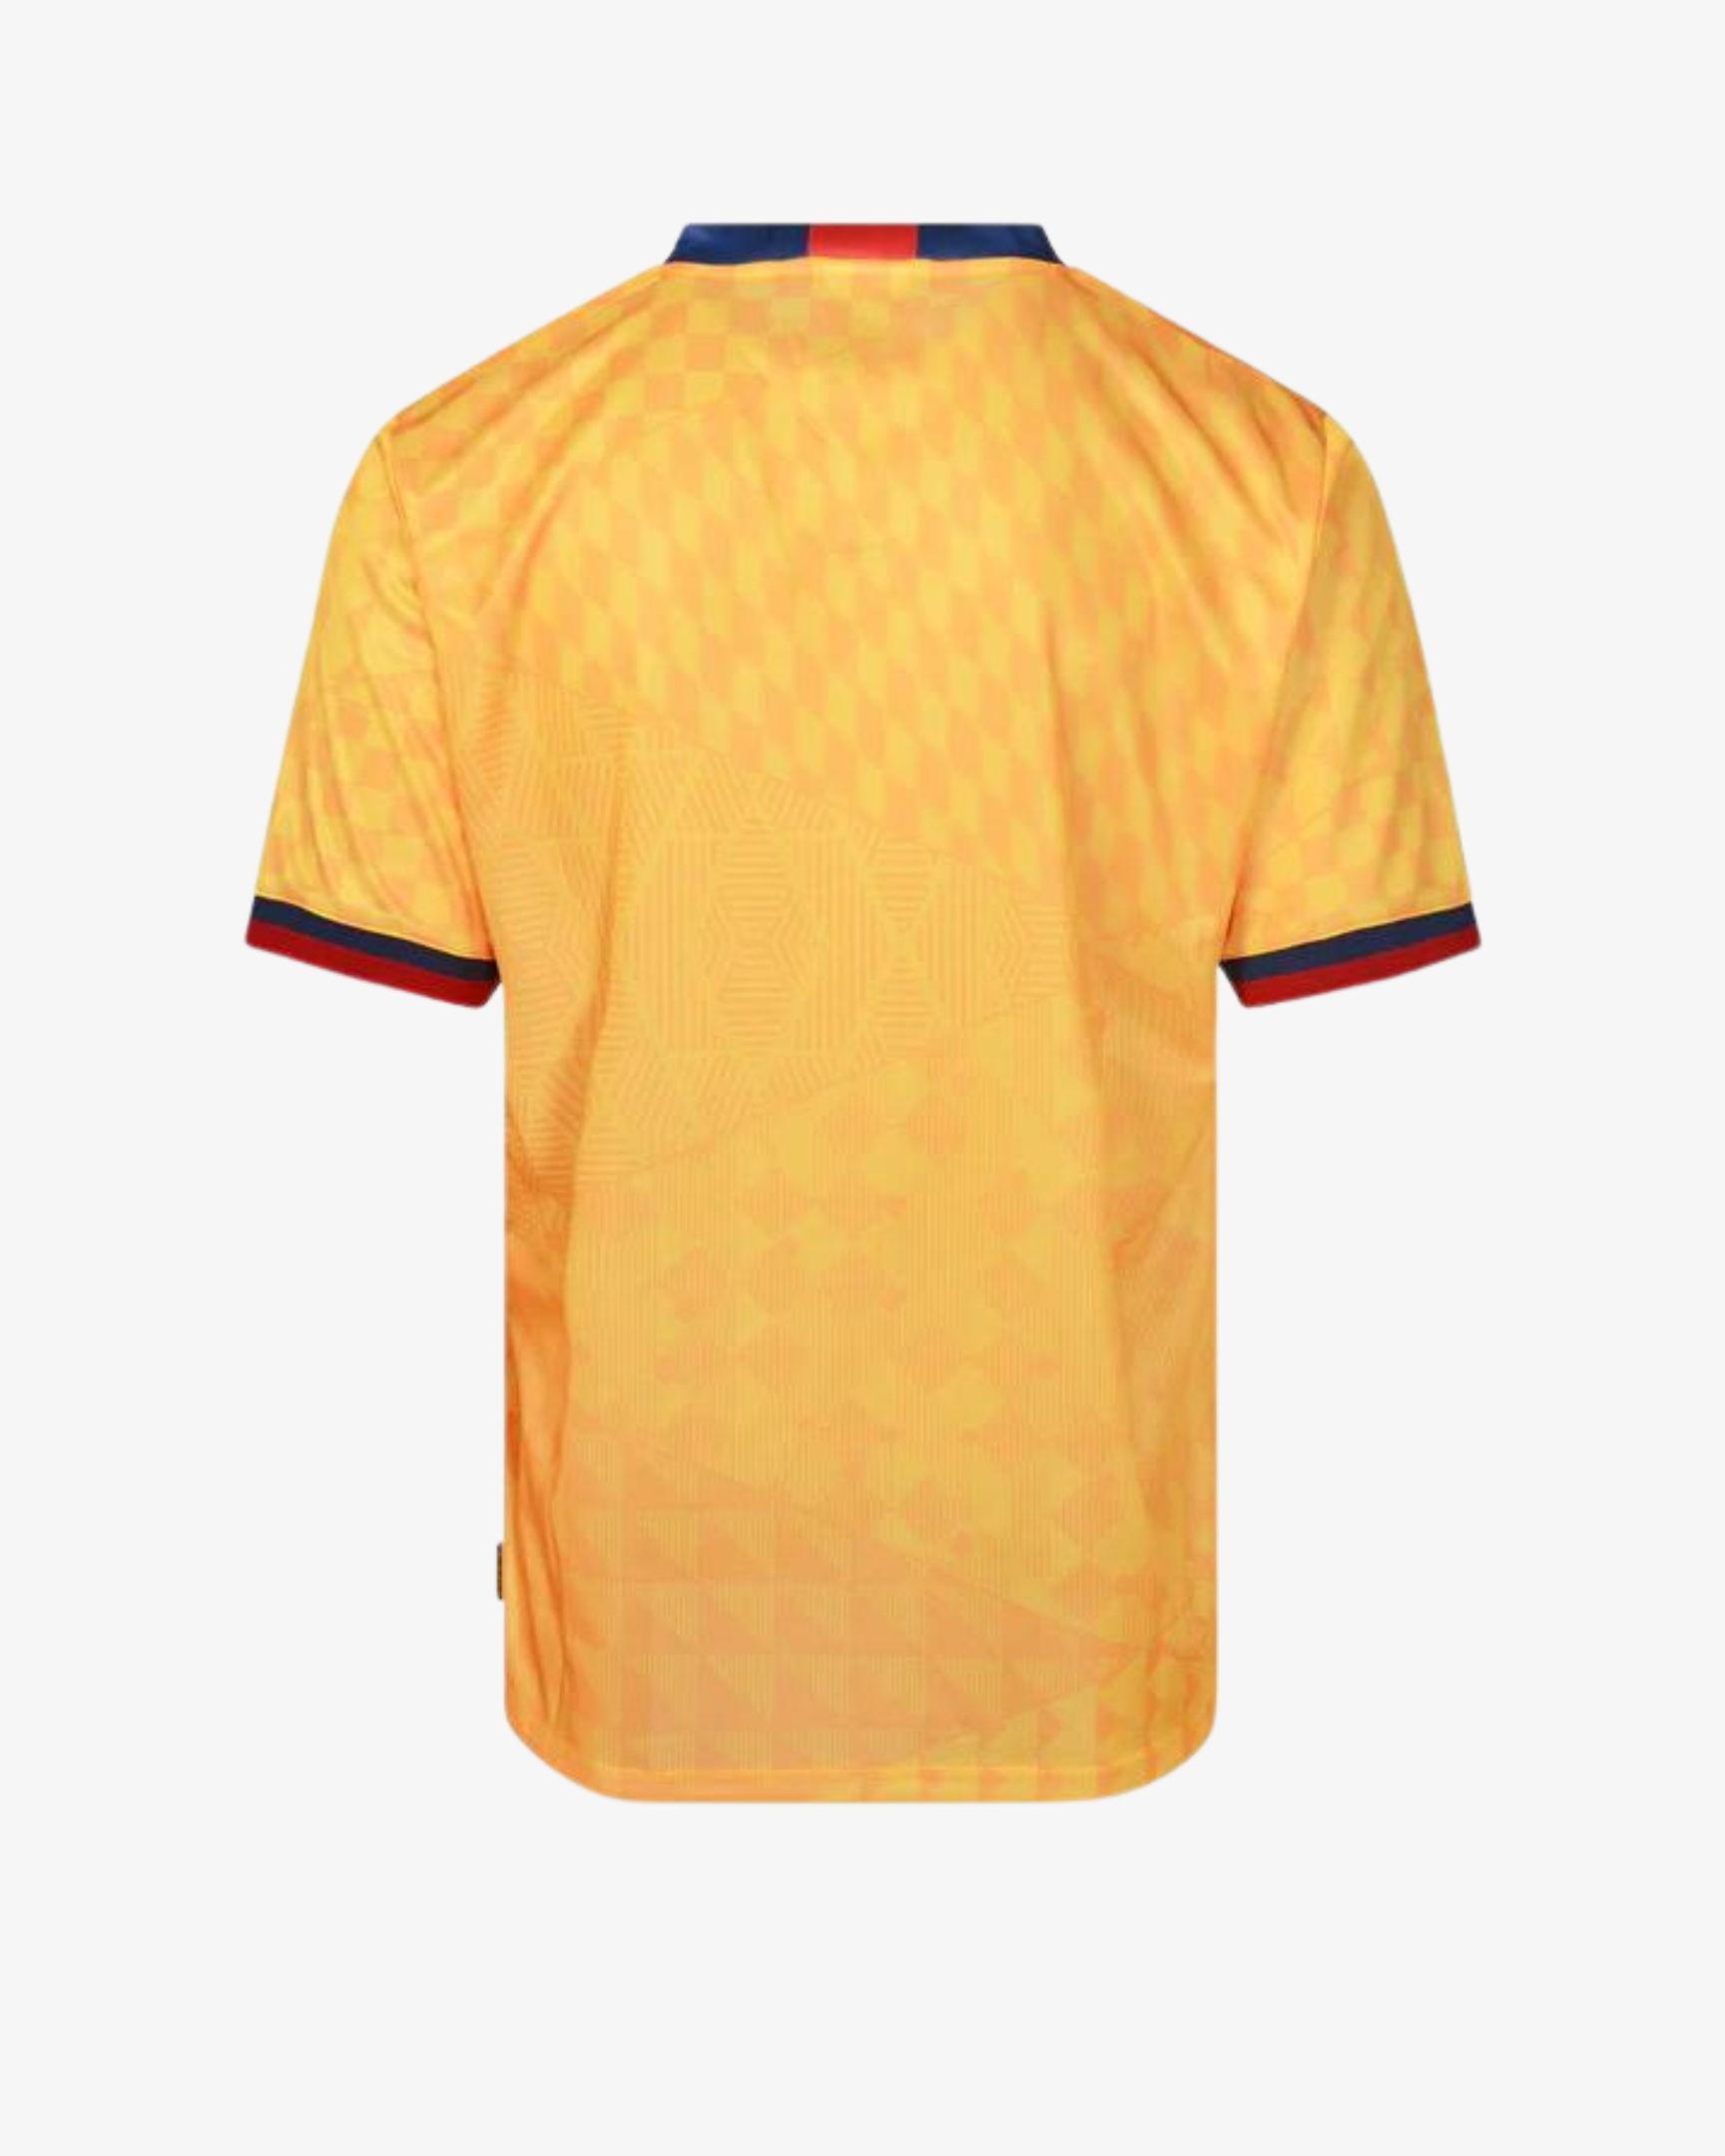 COLOMBIA ICONIC GRAPHIC JERSEY